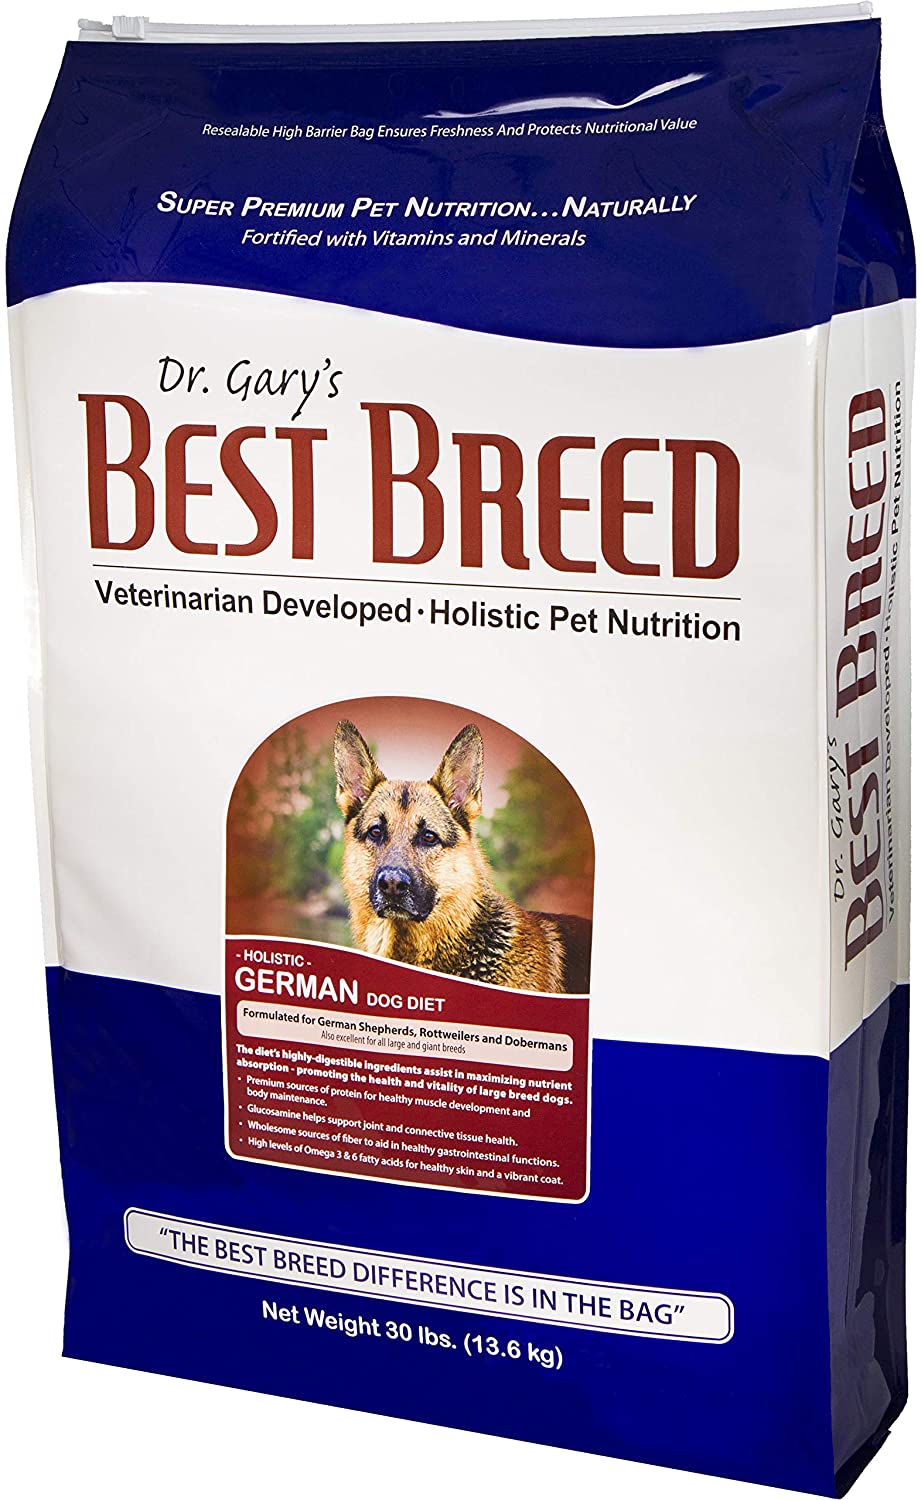 Best Dog Food For German Shepherds: Great Nutrition For A Healthy GSD - Canine Bible